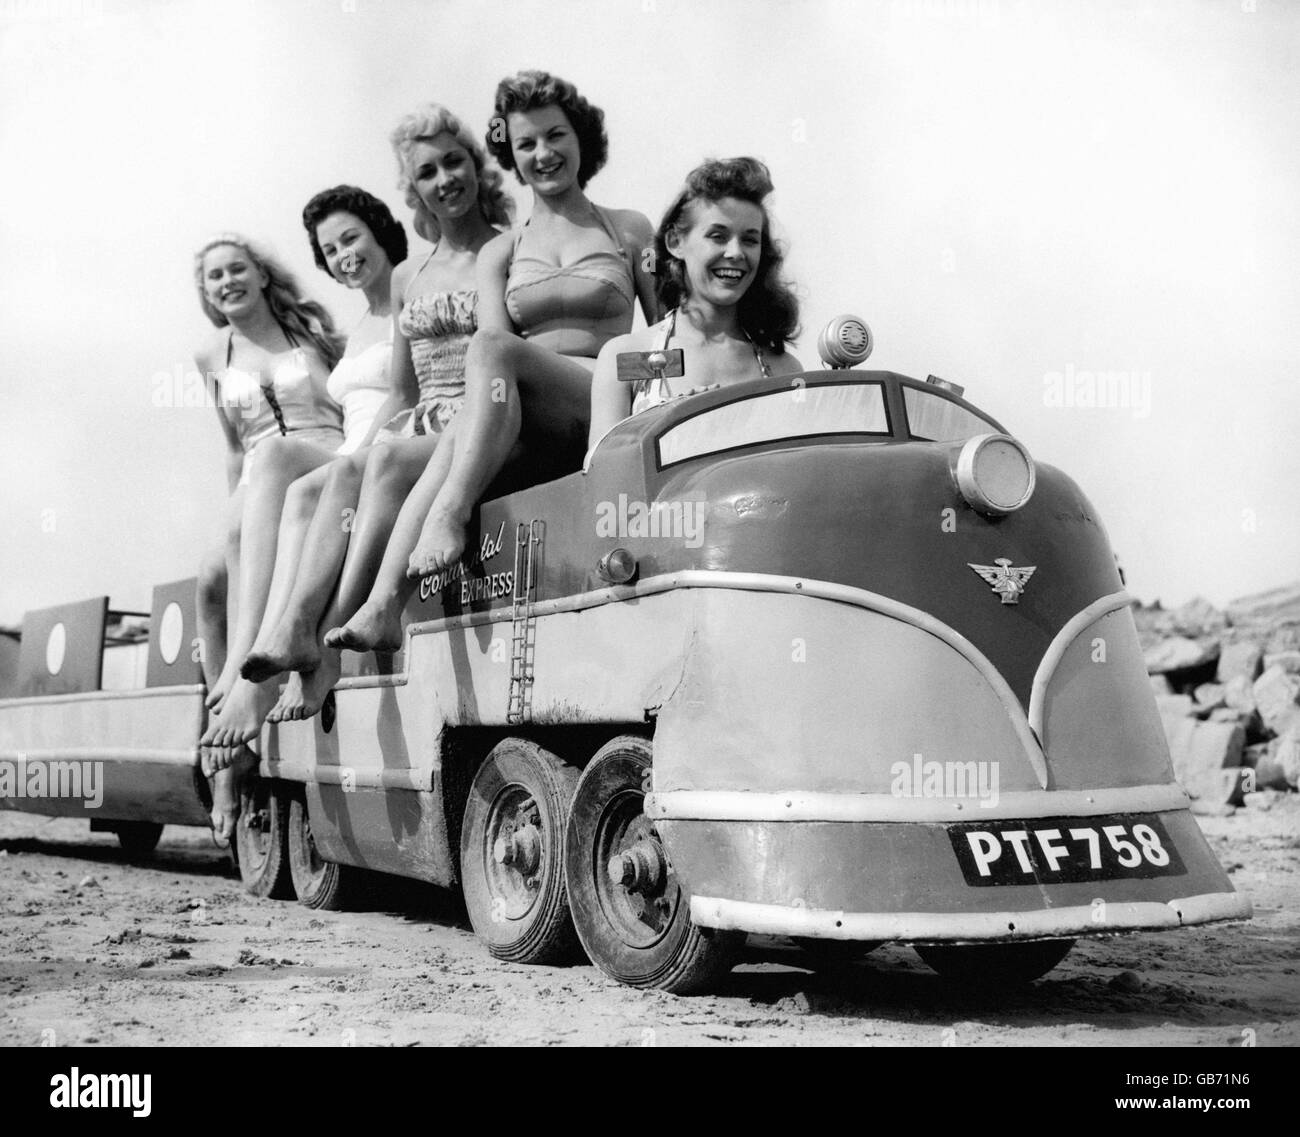 Girls have fun on the miniature train. From left, Delyse Humphreys, Sheila McGaffigan, Dianne Coltman, Patricia McHugh and Roberta Brown. Stock Photo